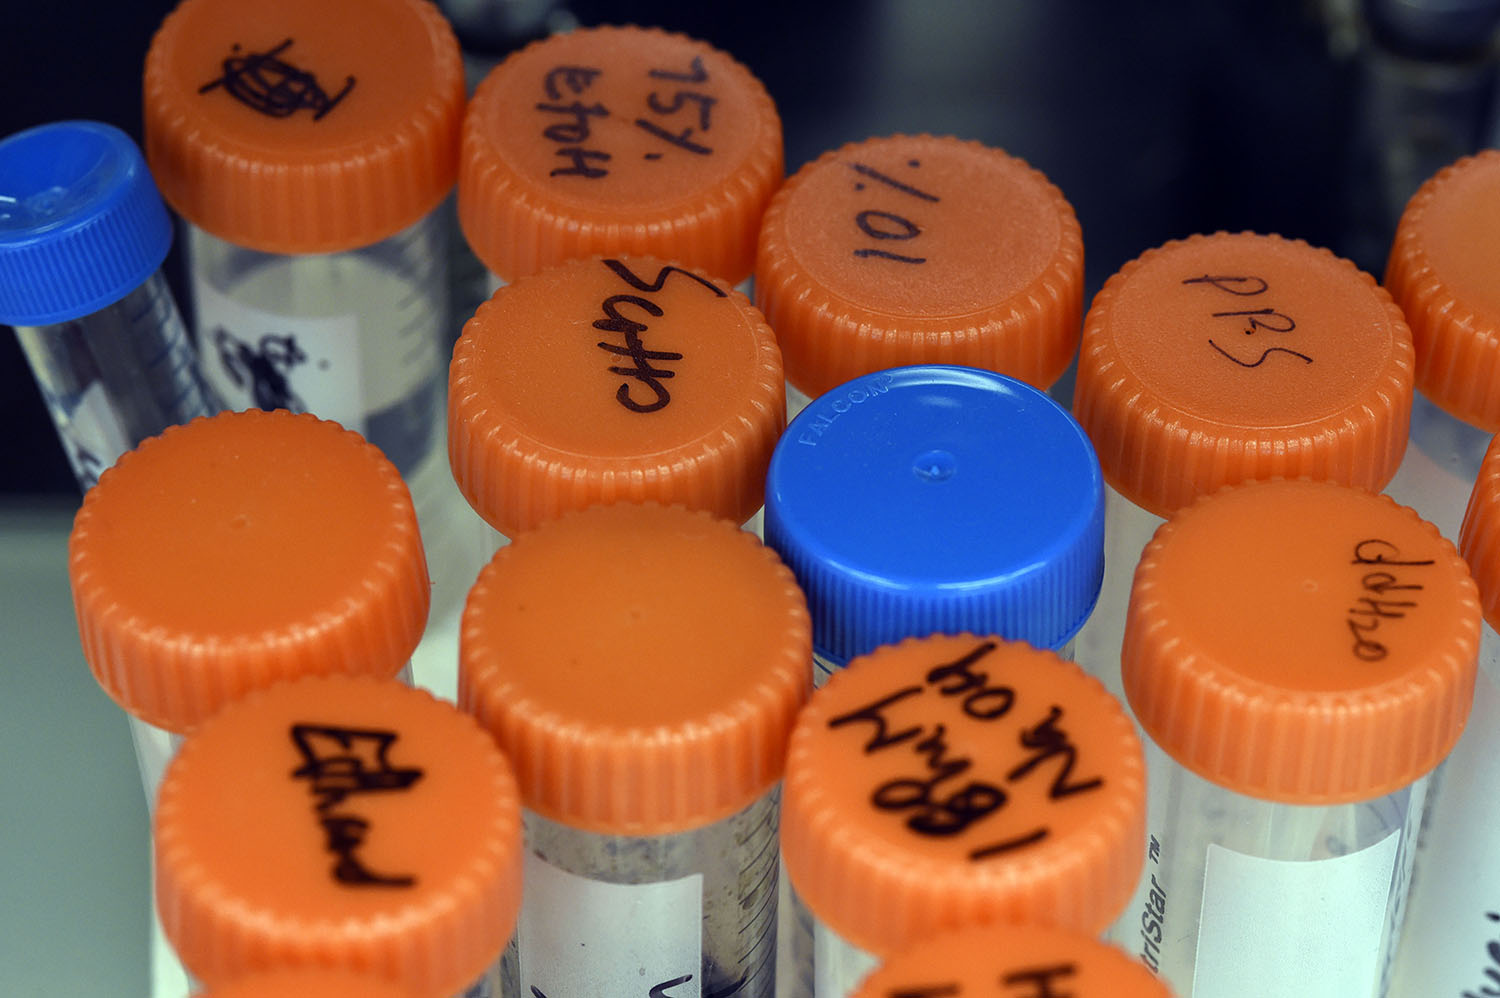 photo shows the orange tops of a groub of lab beakers.